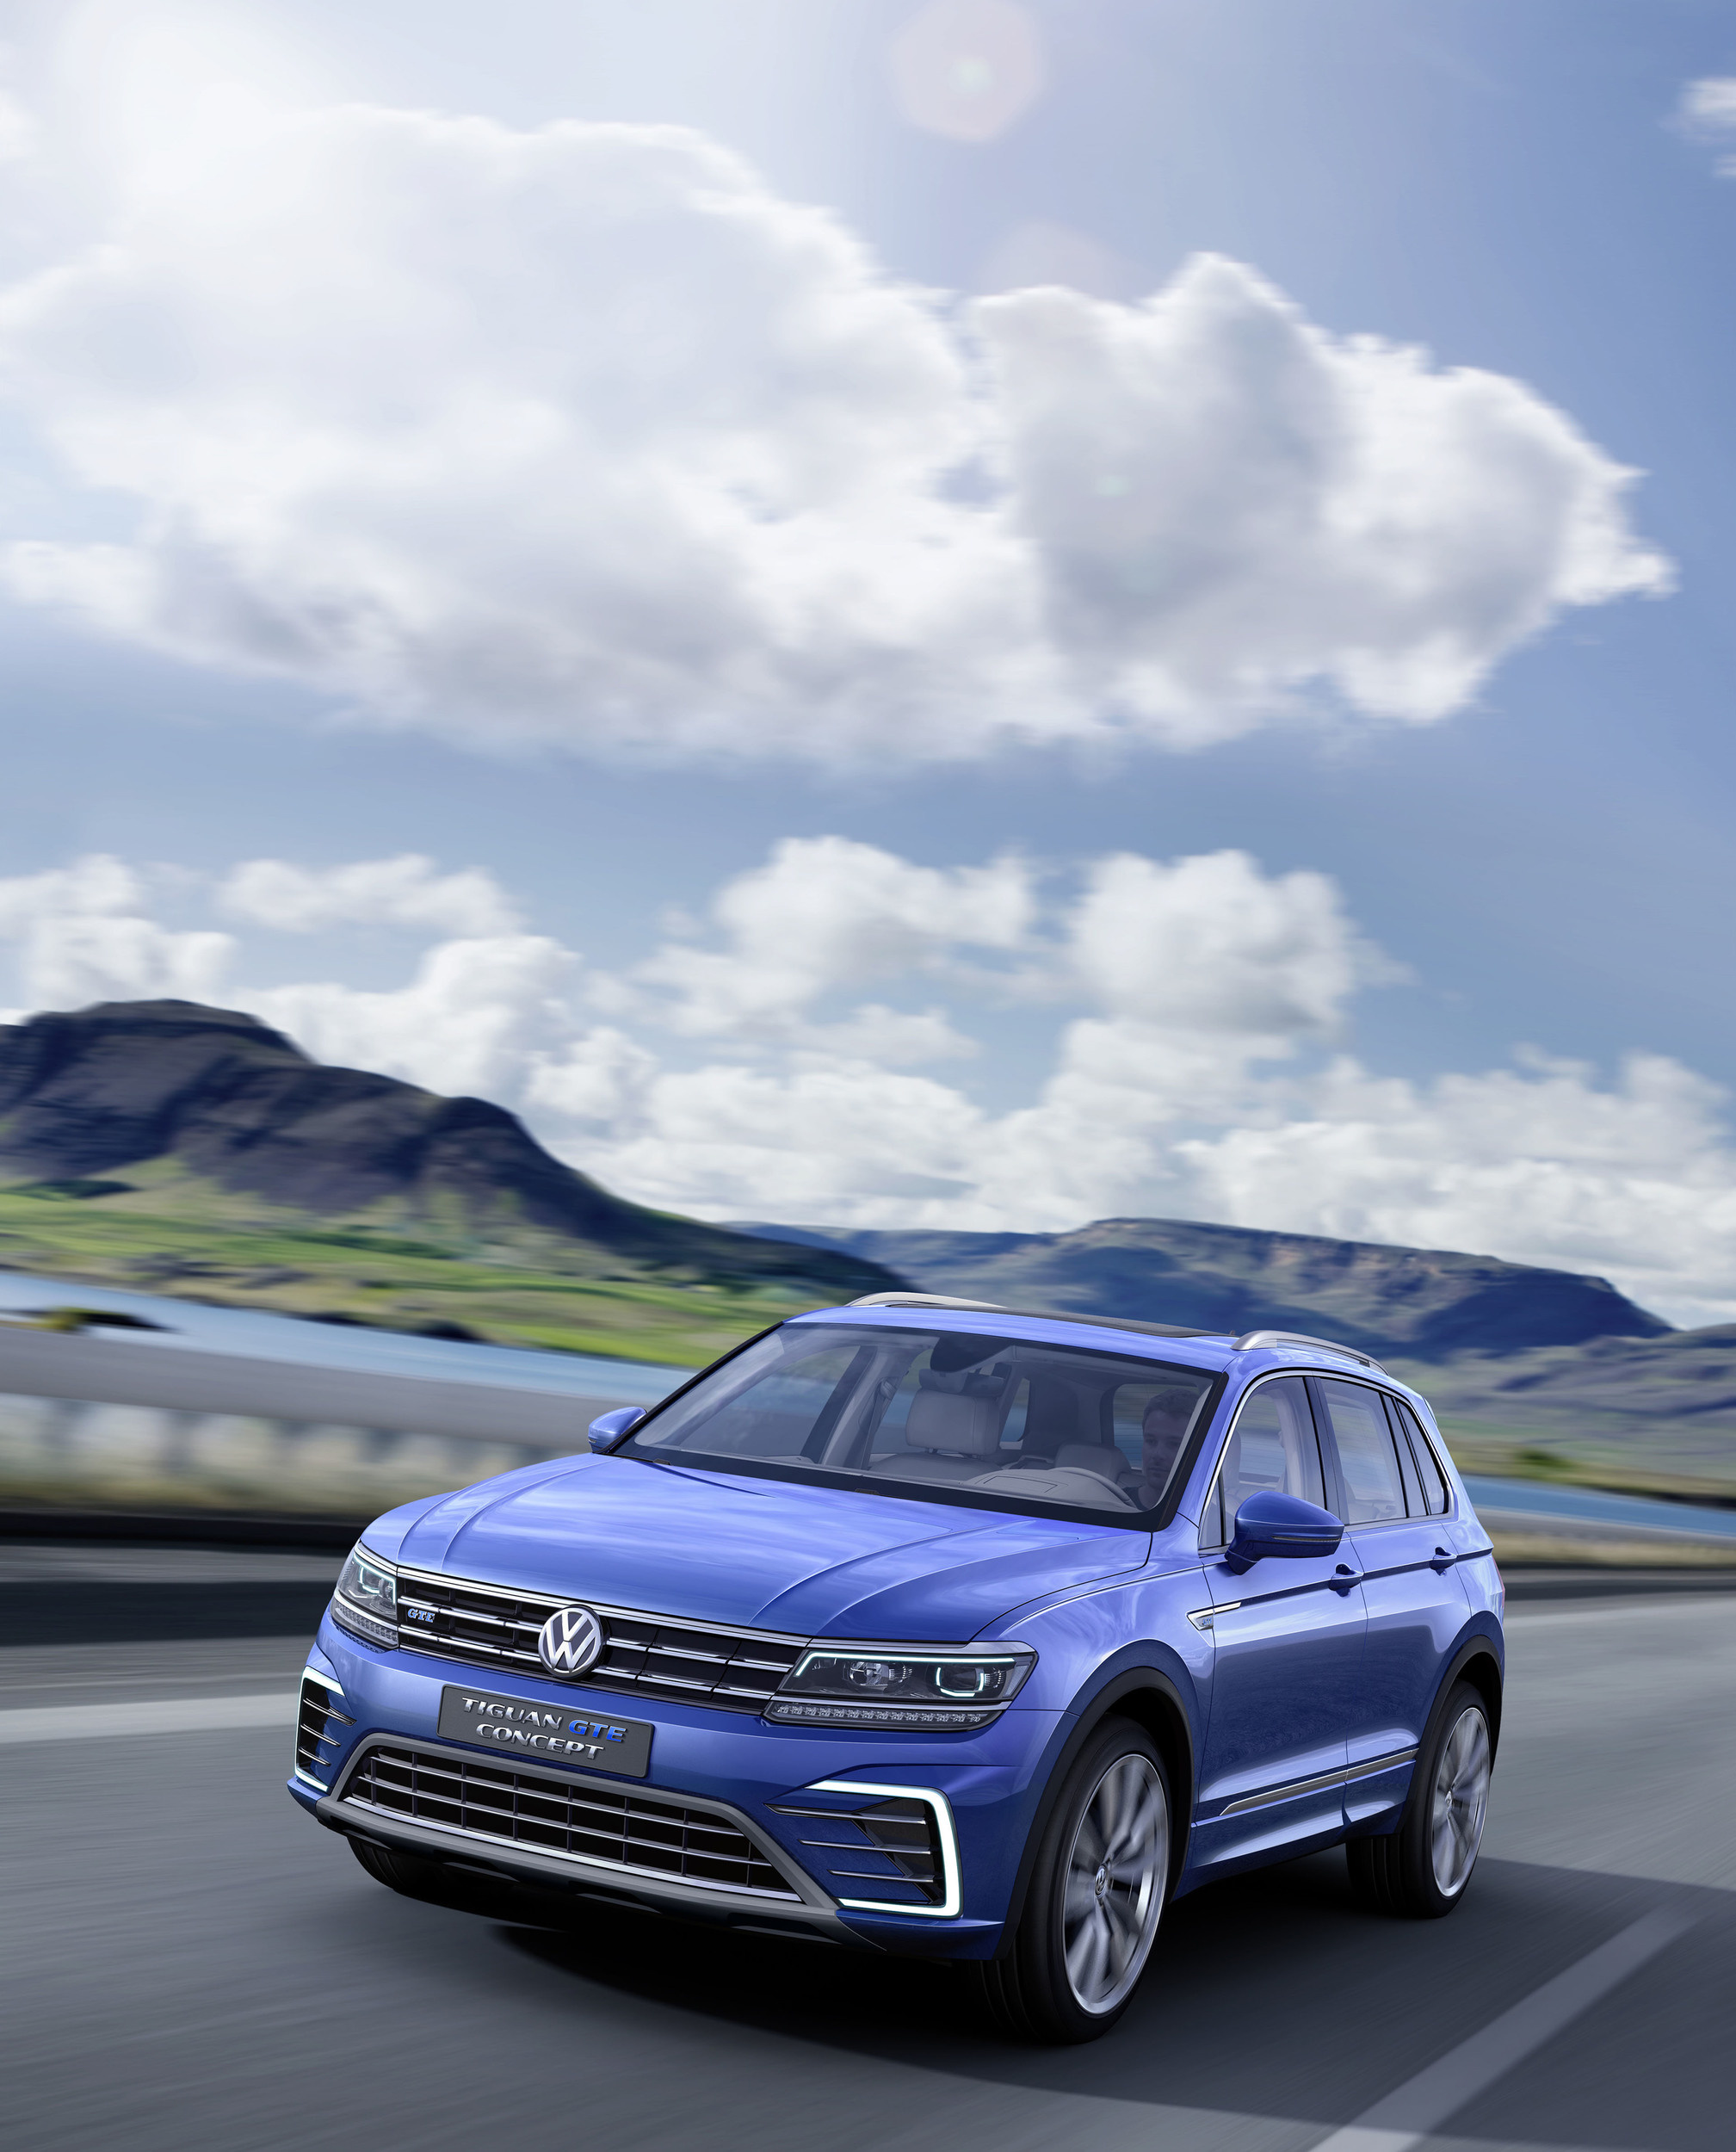 Volkswagen Tiguan wallpapers, Striking and versatile, Adventure-ready, Modern and sophisticated, 2020x2500 HD Handy